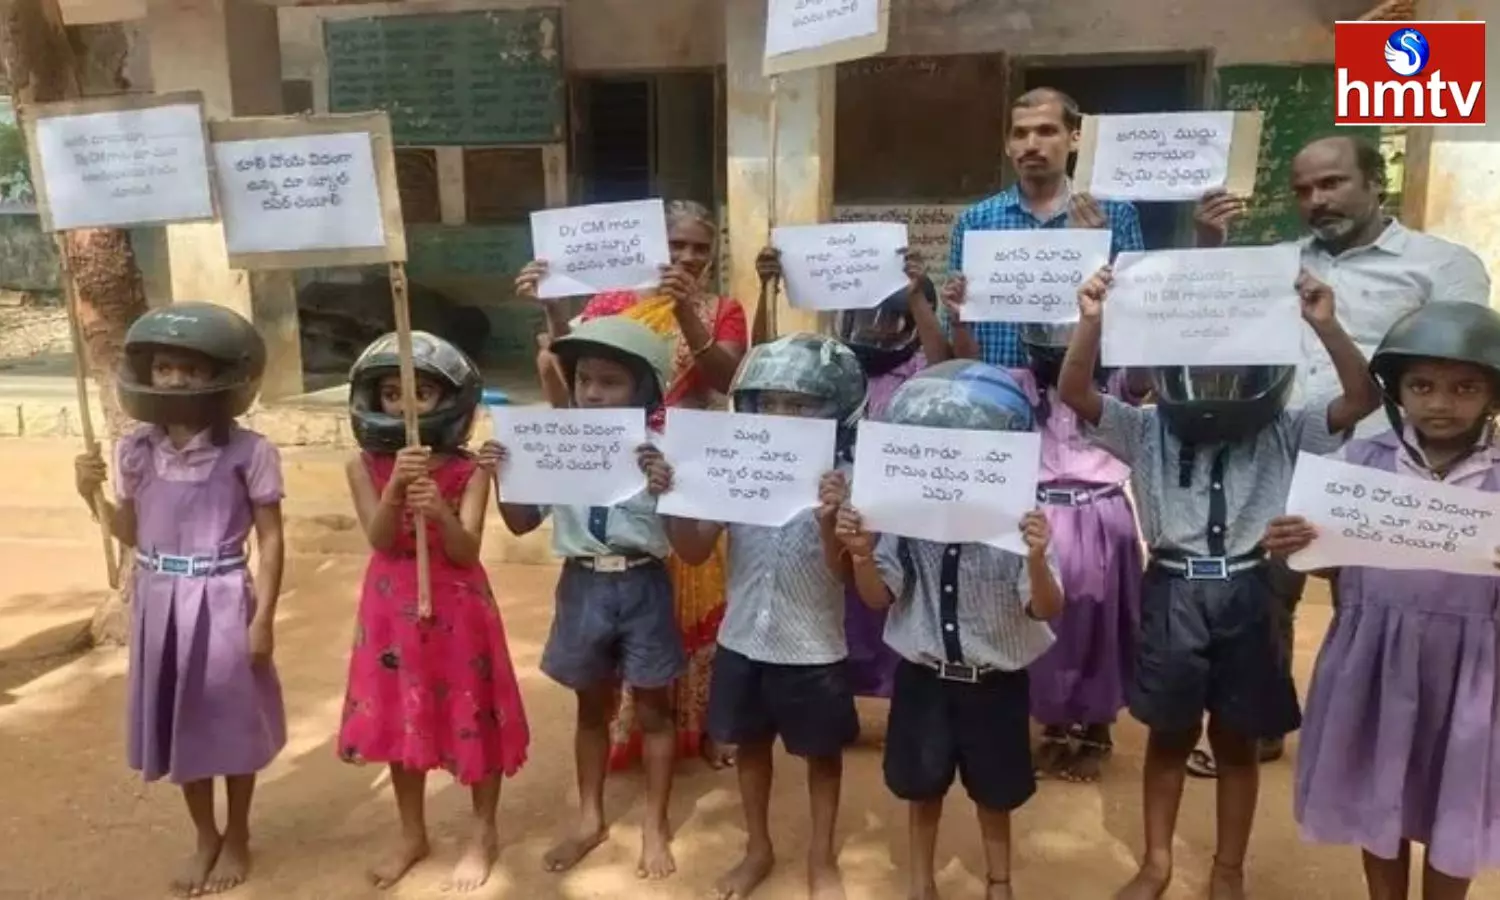 Protest By Students At Sanyasipalli School In Chittoor District